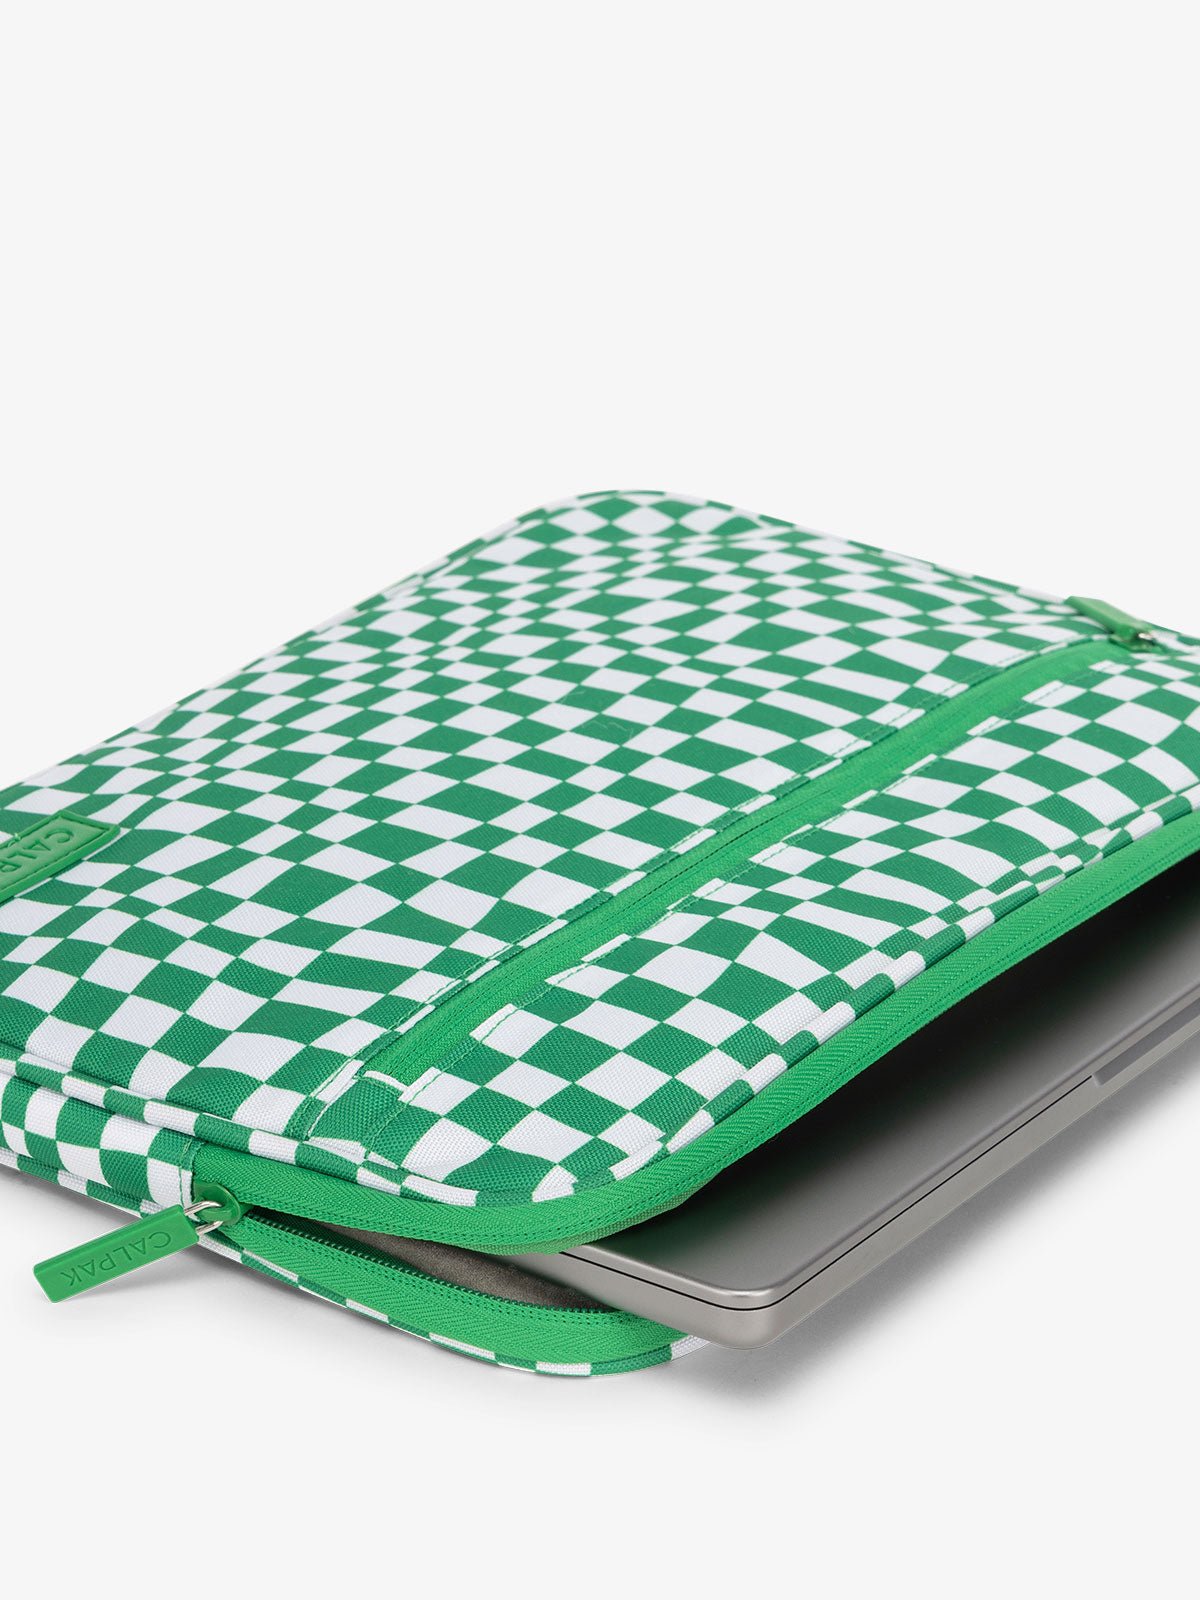 CALPAK 13-14 Inch Laptop sleeve with protective pockets for work in green checkerboard